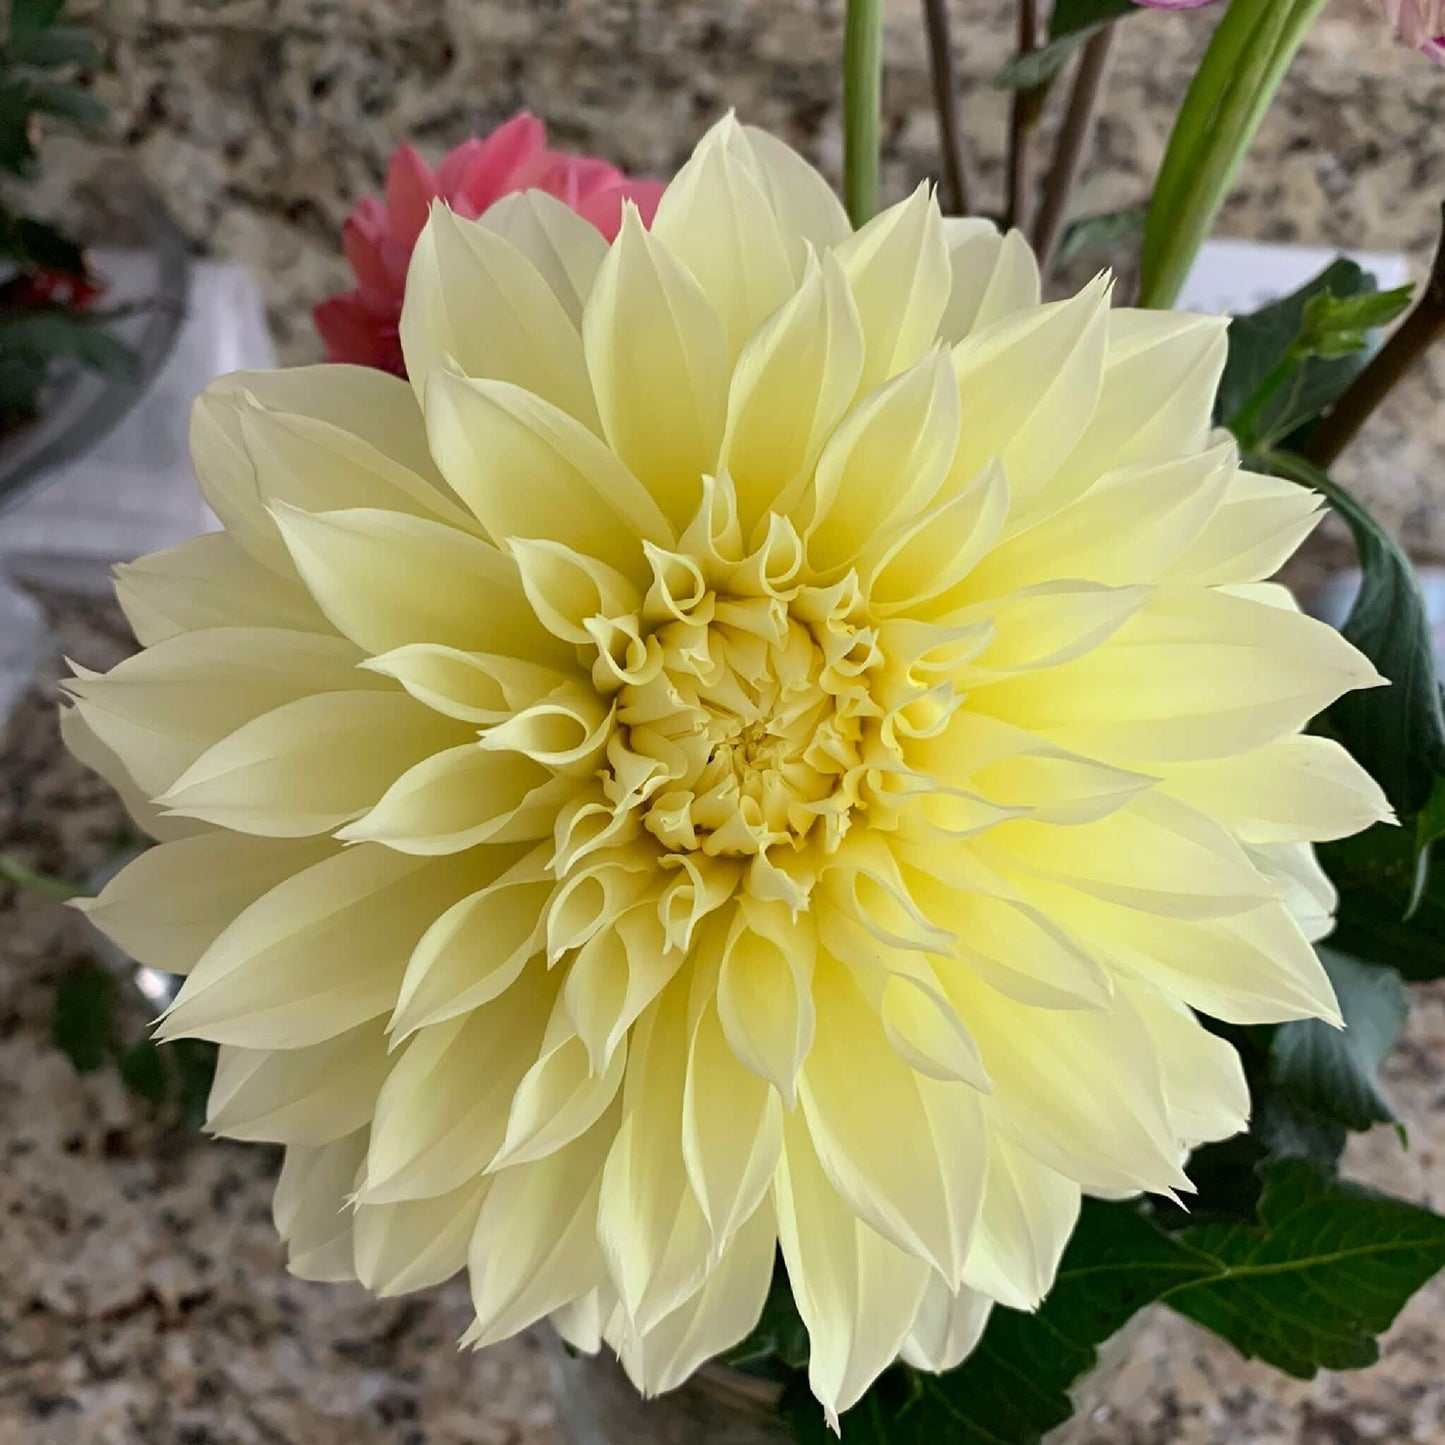 Blondee dahlia pot tubers for sale